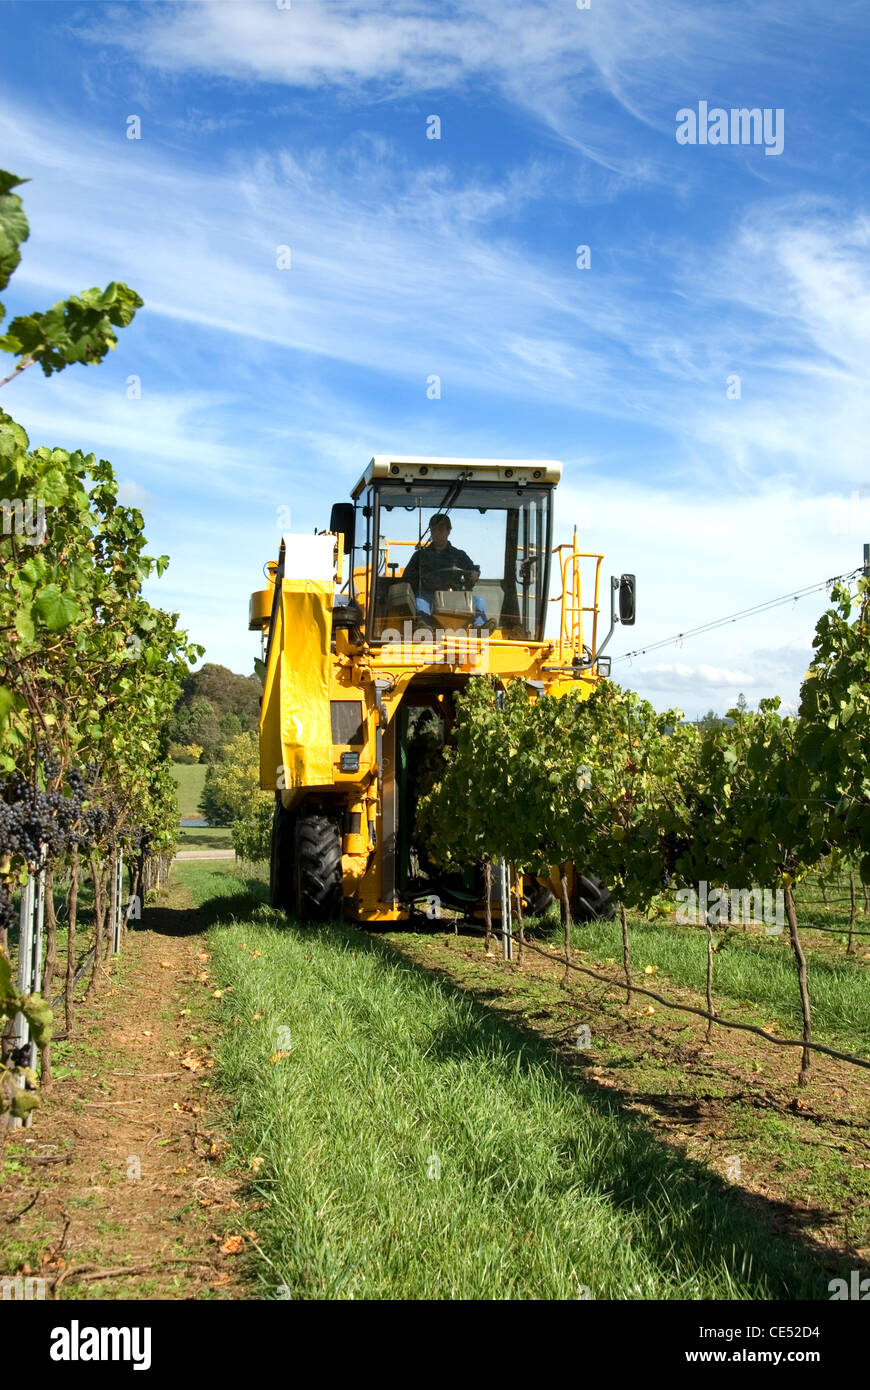 Harvesting grapes in a vineyard near Sutton Forest, New South Wales, Australia Stock Photo